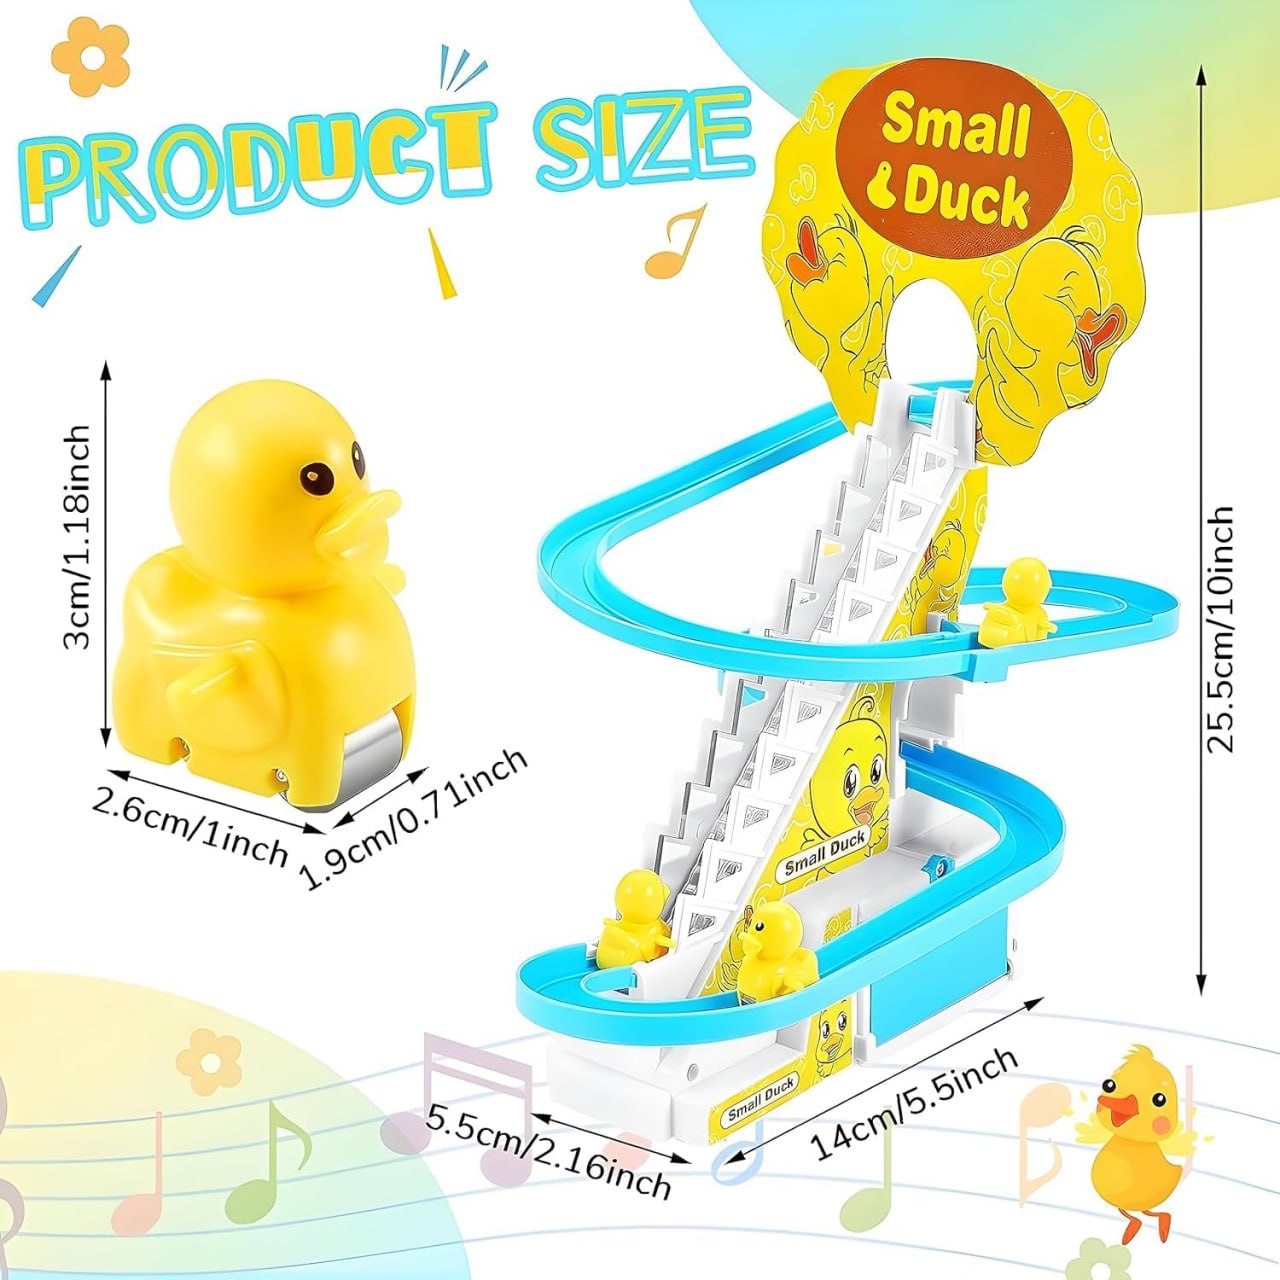 Small Duck Track Toy For Kids ( 3 pcs ) Ducks